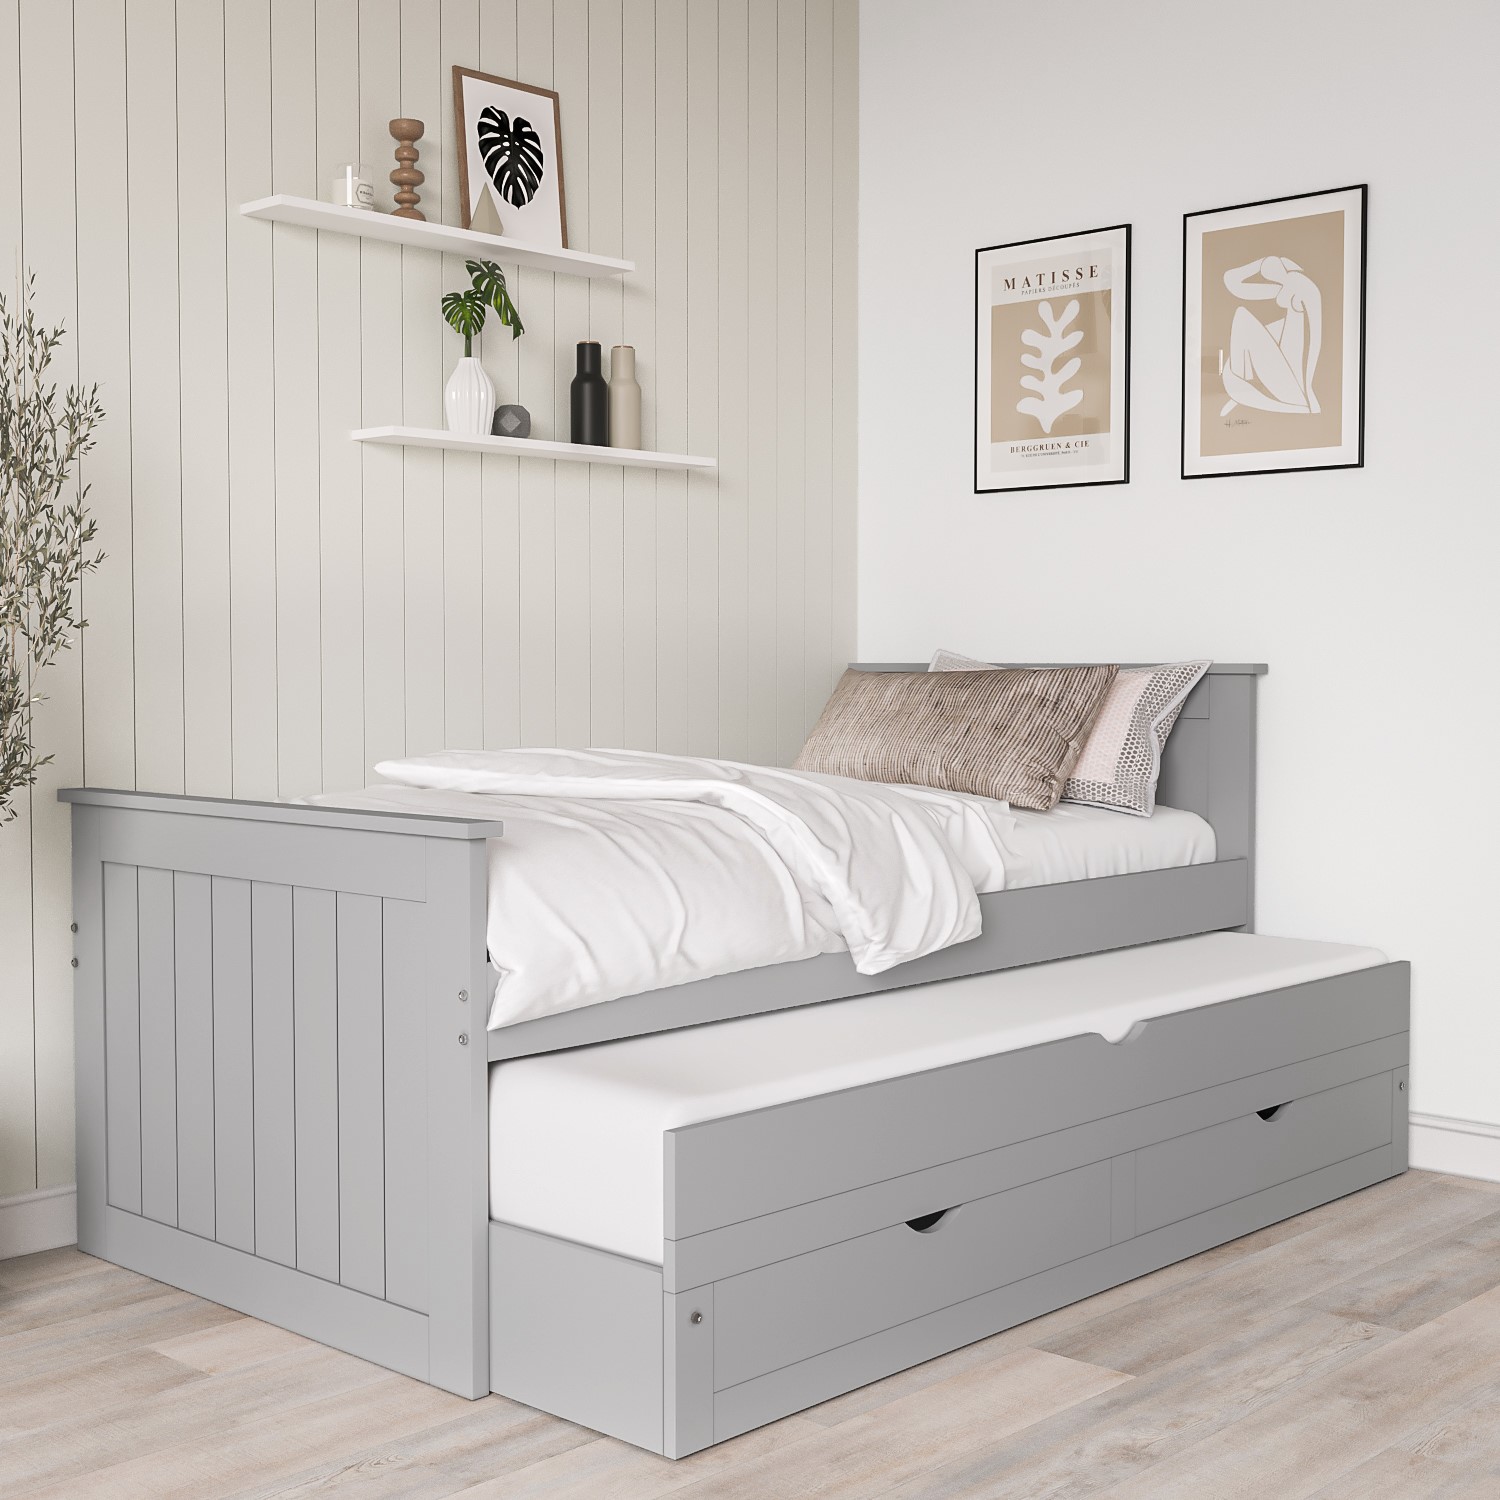 Photo of Single grey wooden trundle bed with storage - sander